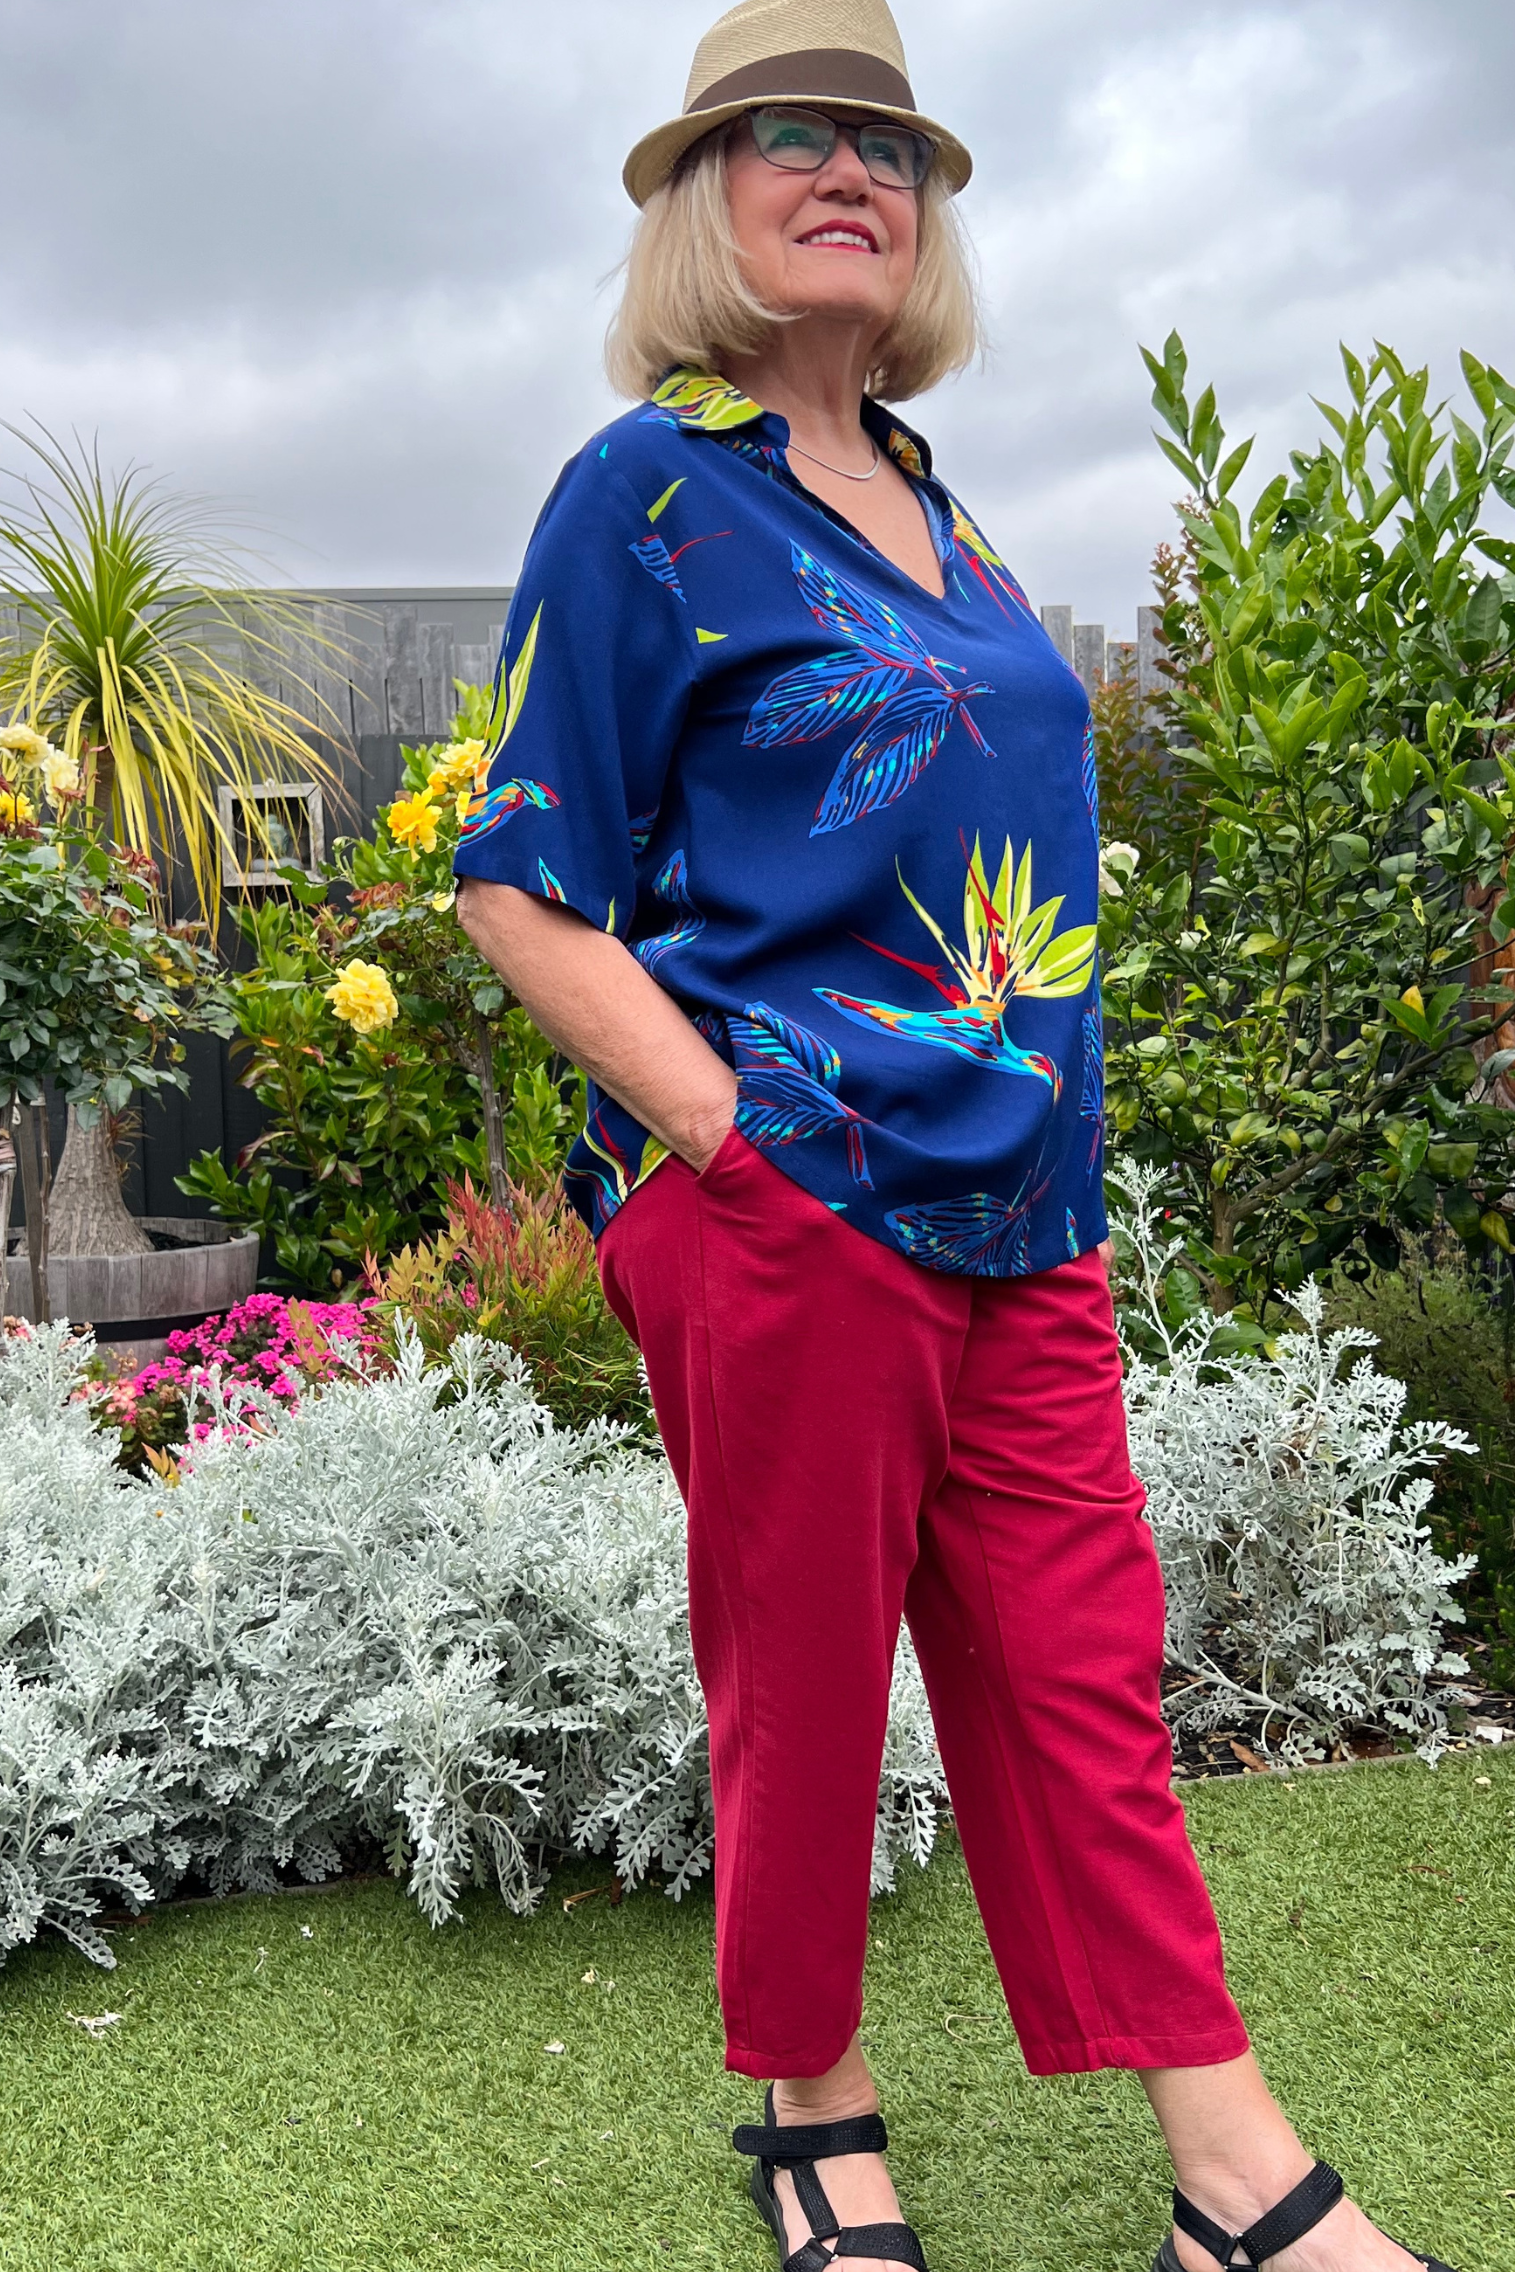 Kita Ku modelling a tropical paradise printed top Rebecca over red pant port in a garden setting.